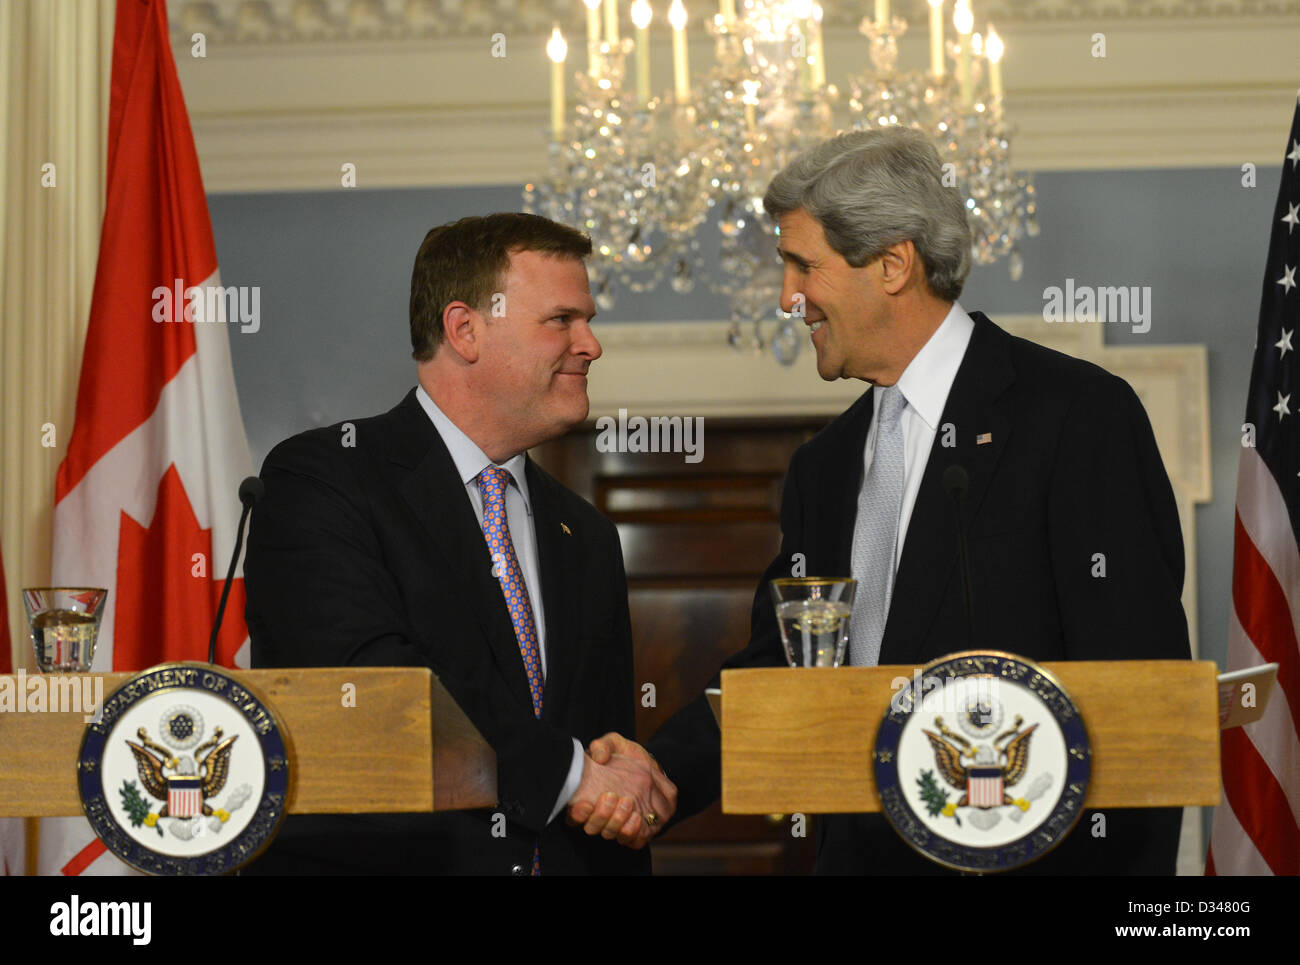 Washington DC, USA. 8th February 2013. US Secretary of State John Kerry shakes hands with Canadian Foreign Minister John Baird after their joint press conference at the Department of State February 8, 2013 in Washington, DC. Credit:  US State Department / Alamy Live News Stock Photo